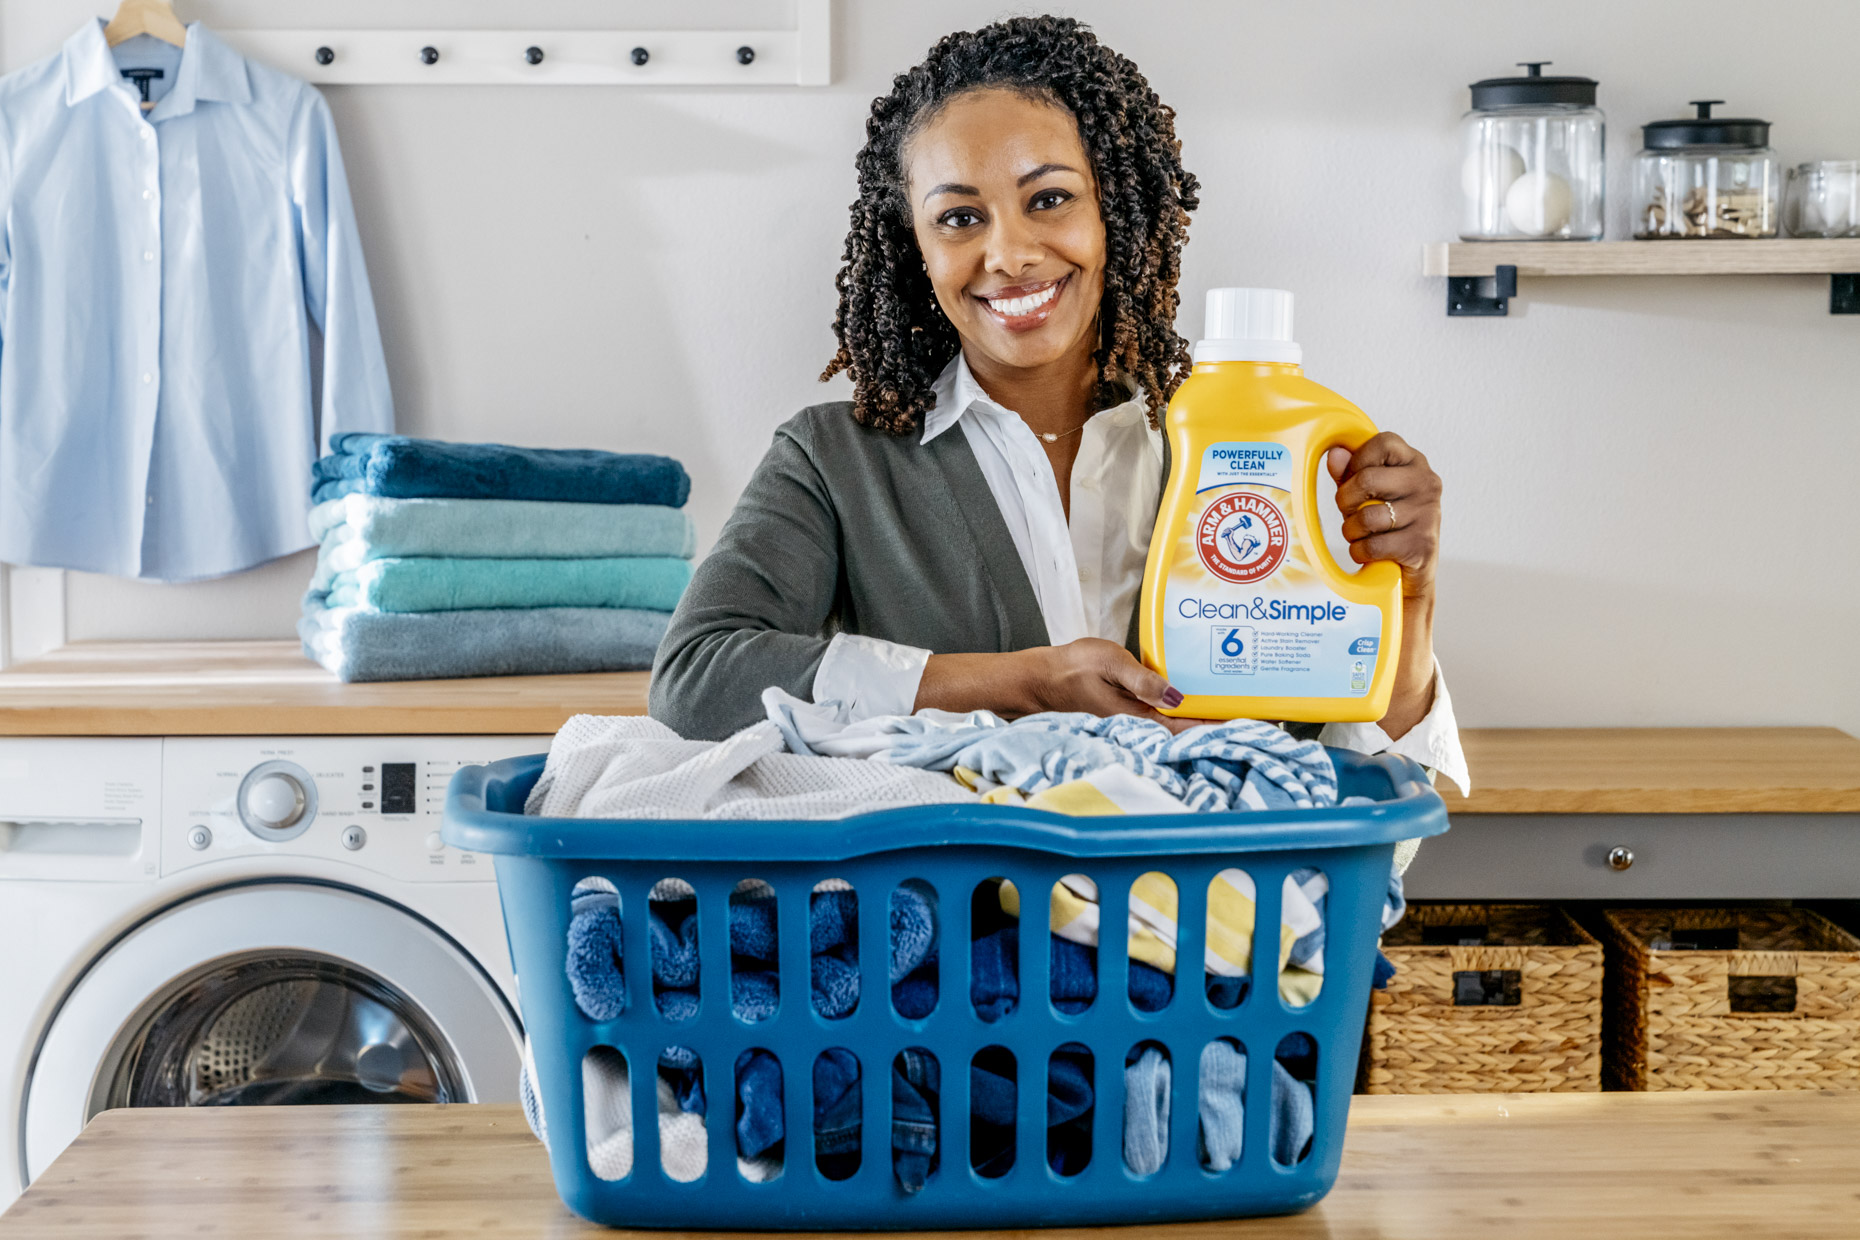 Smiling woman with bottle of Arm and Hammer detergent and basket of laundry